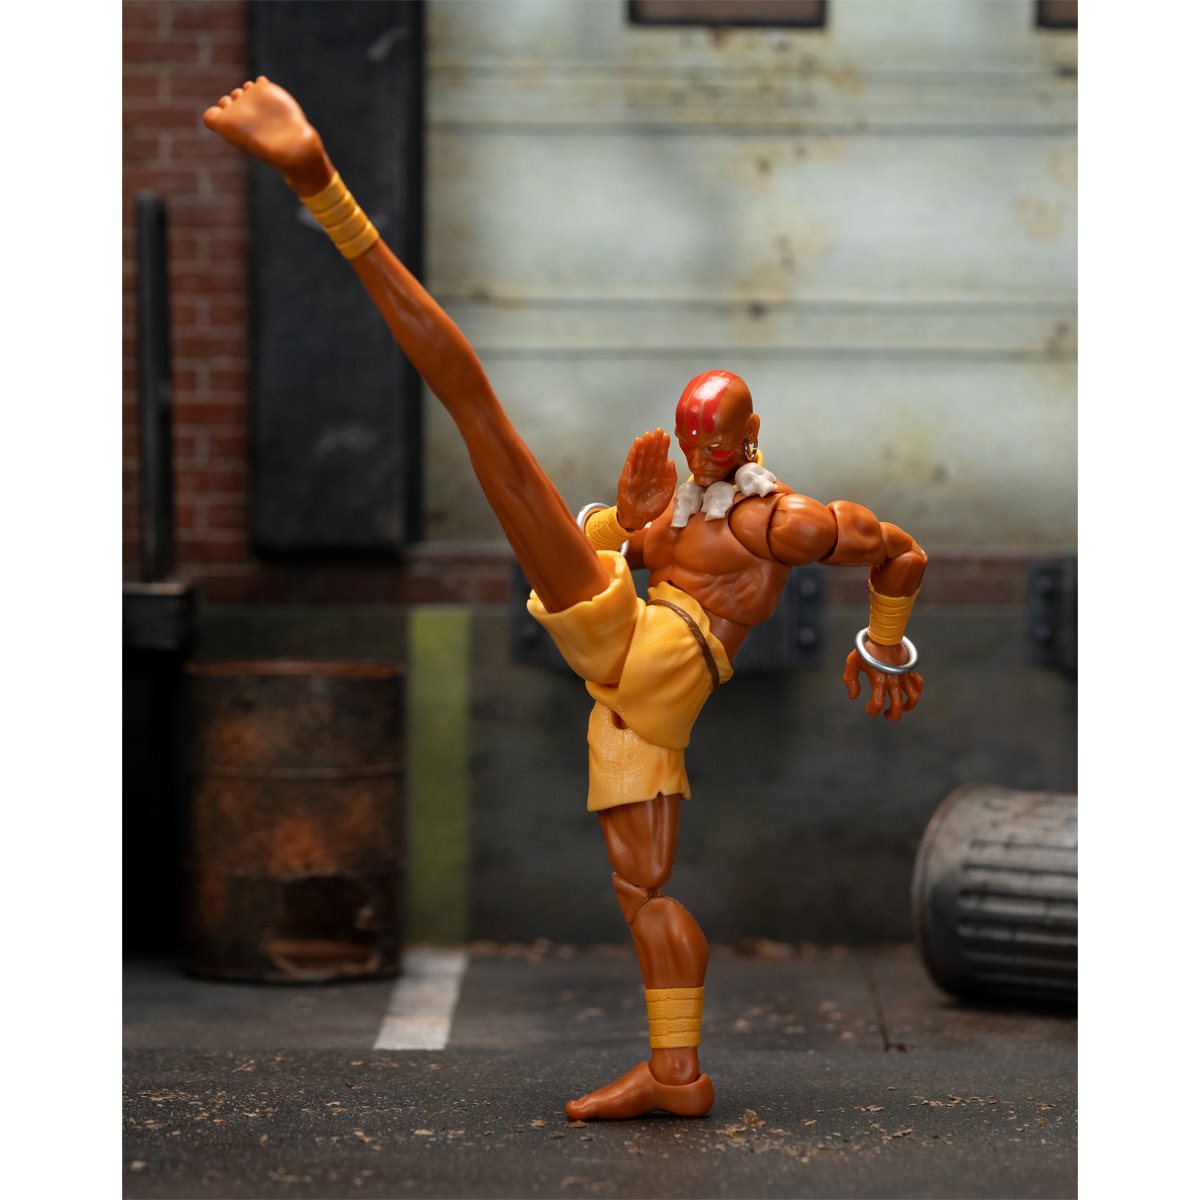 Ultra Street Fighter II Dhalsim 6-Inch Scale Action Figure by Jada Toys